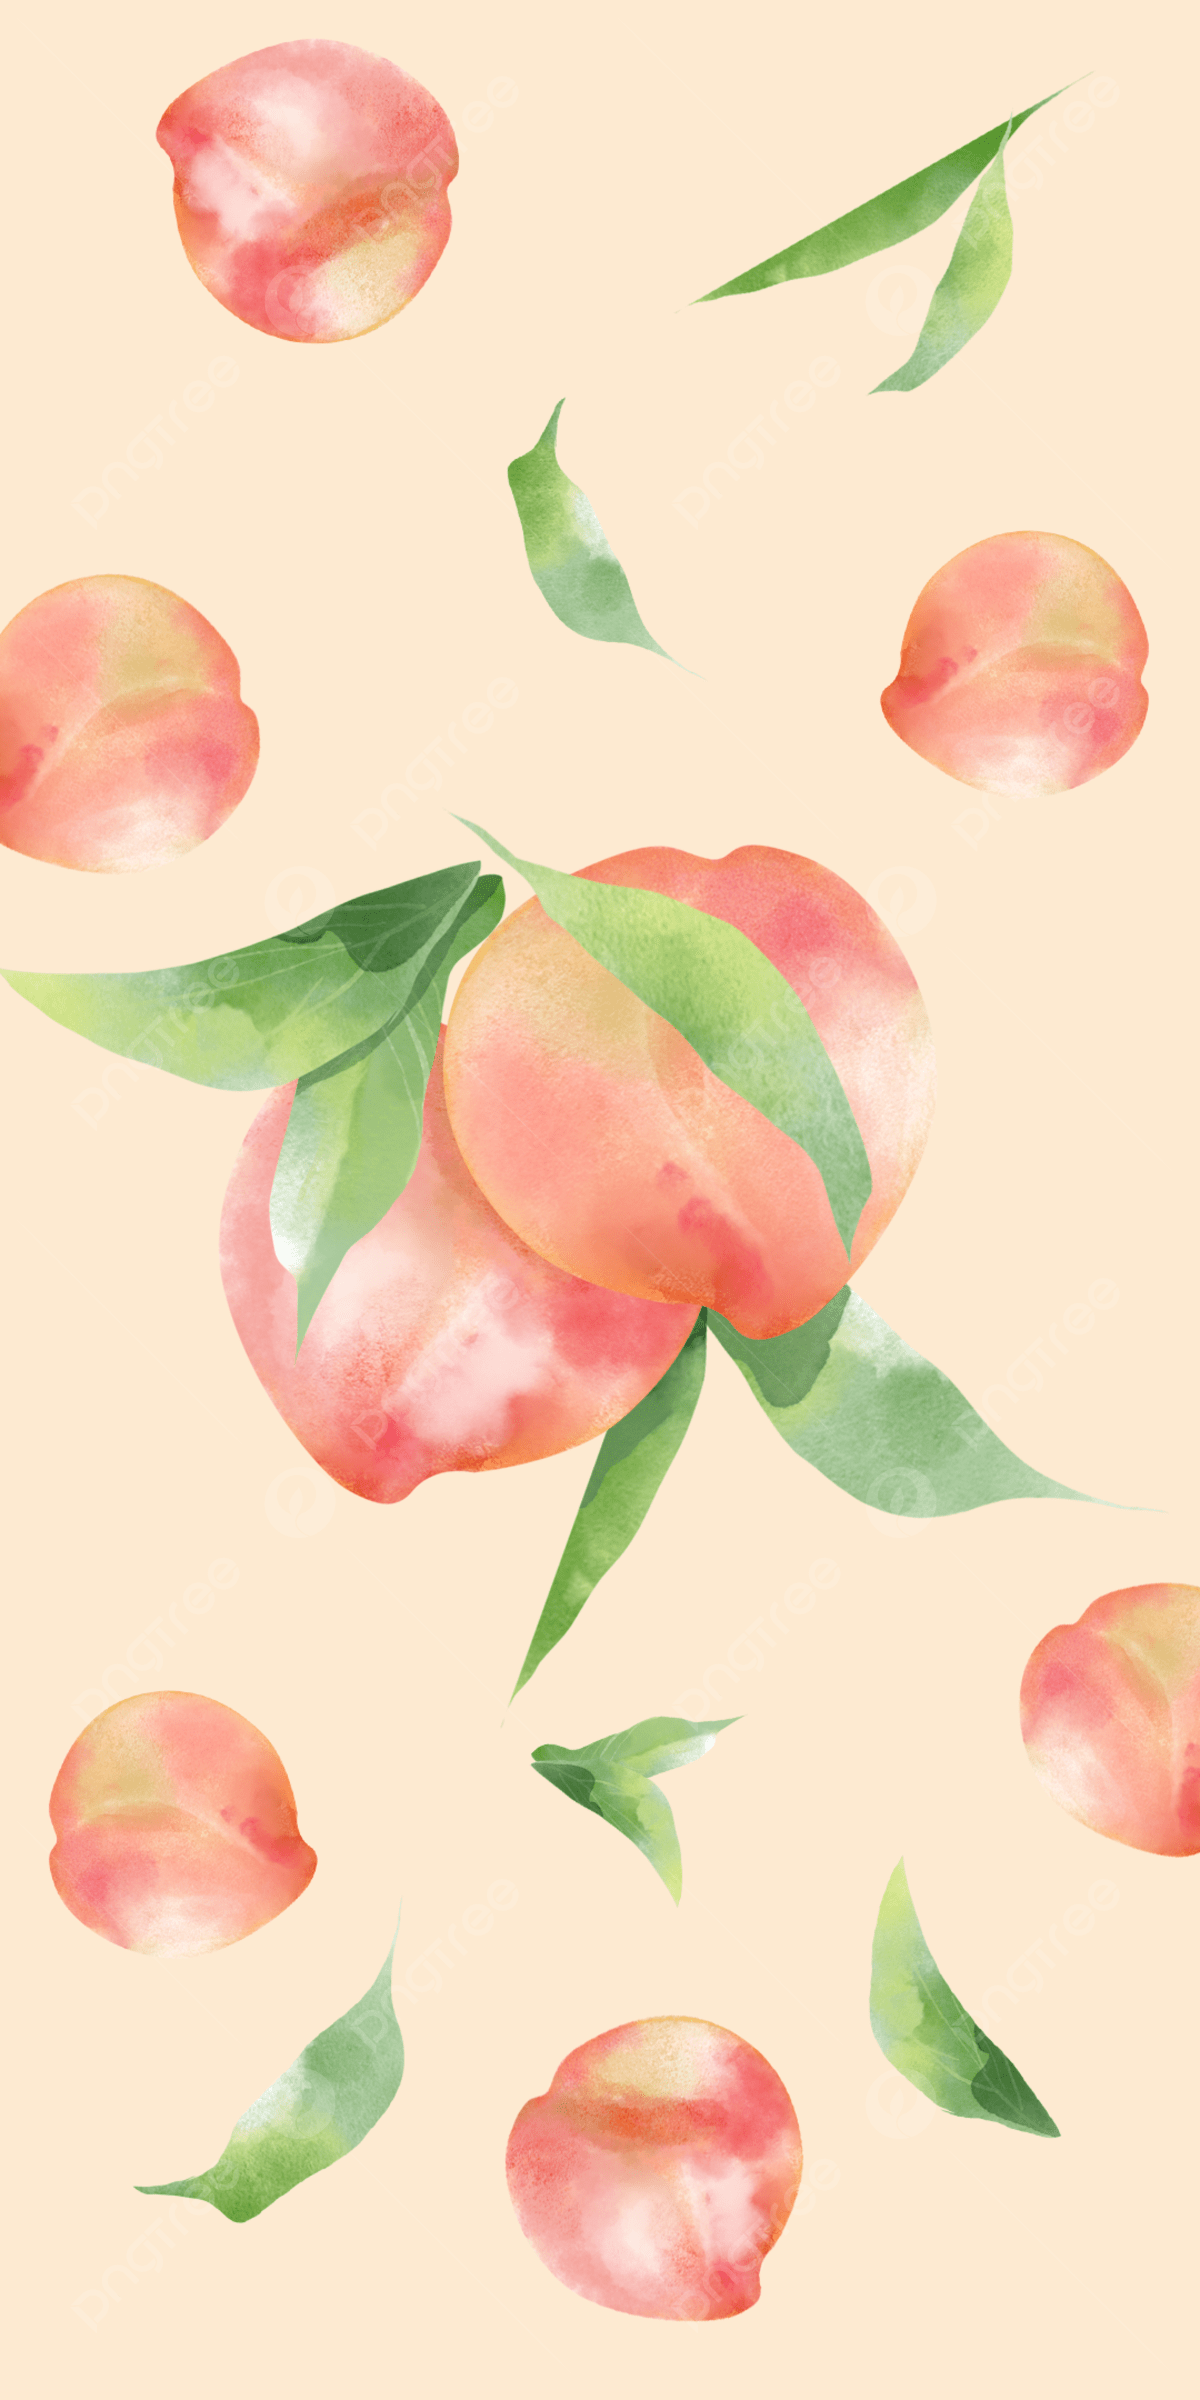 Fruit Wallpaper Watercolor Green Leaf Peach Background Wallpaper Image For Free Download